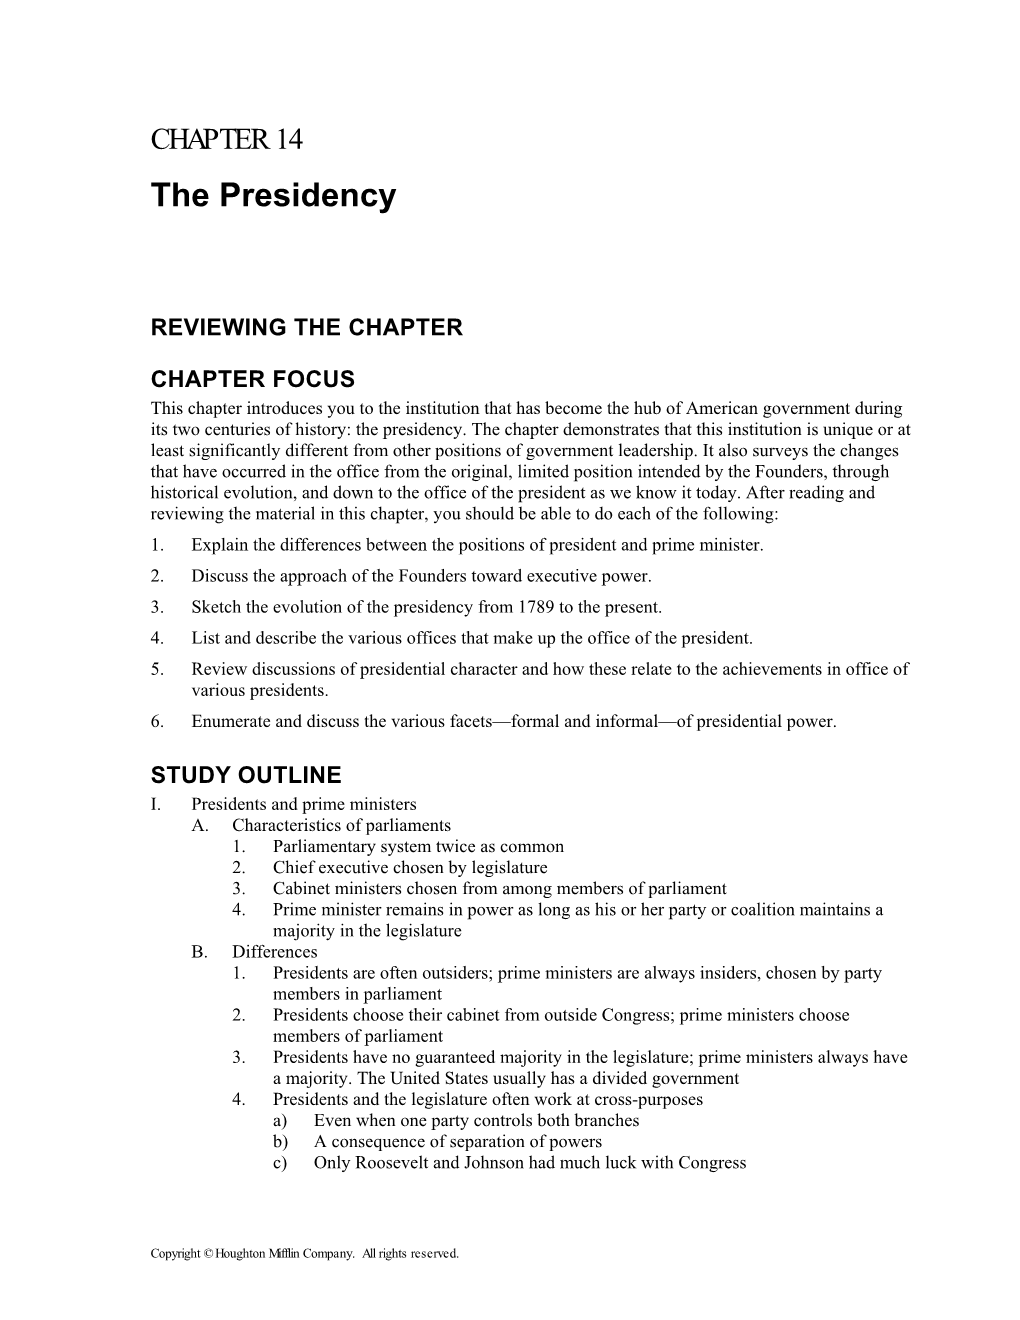 CHAPTER 14 the Presidency